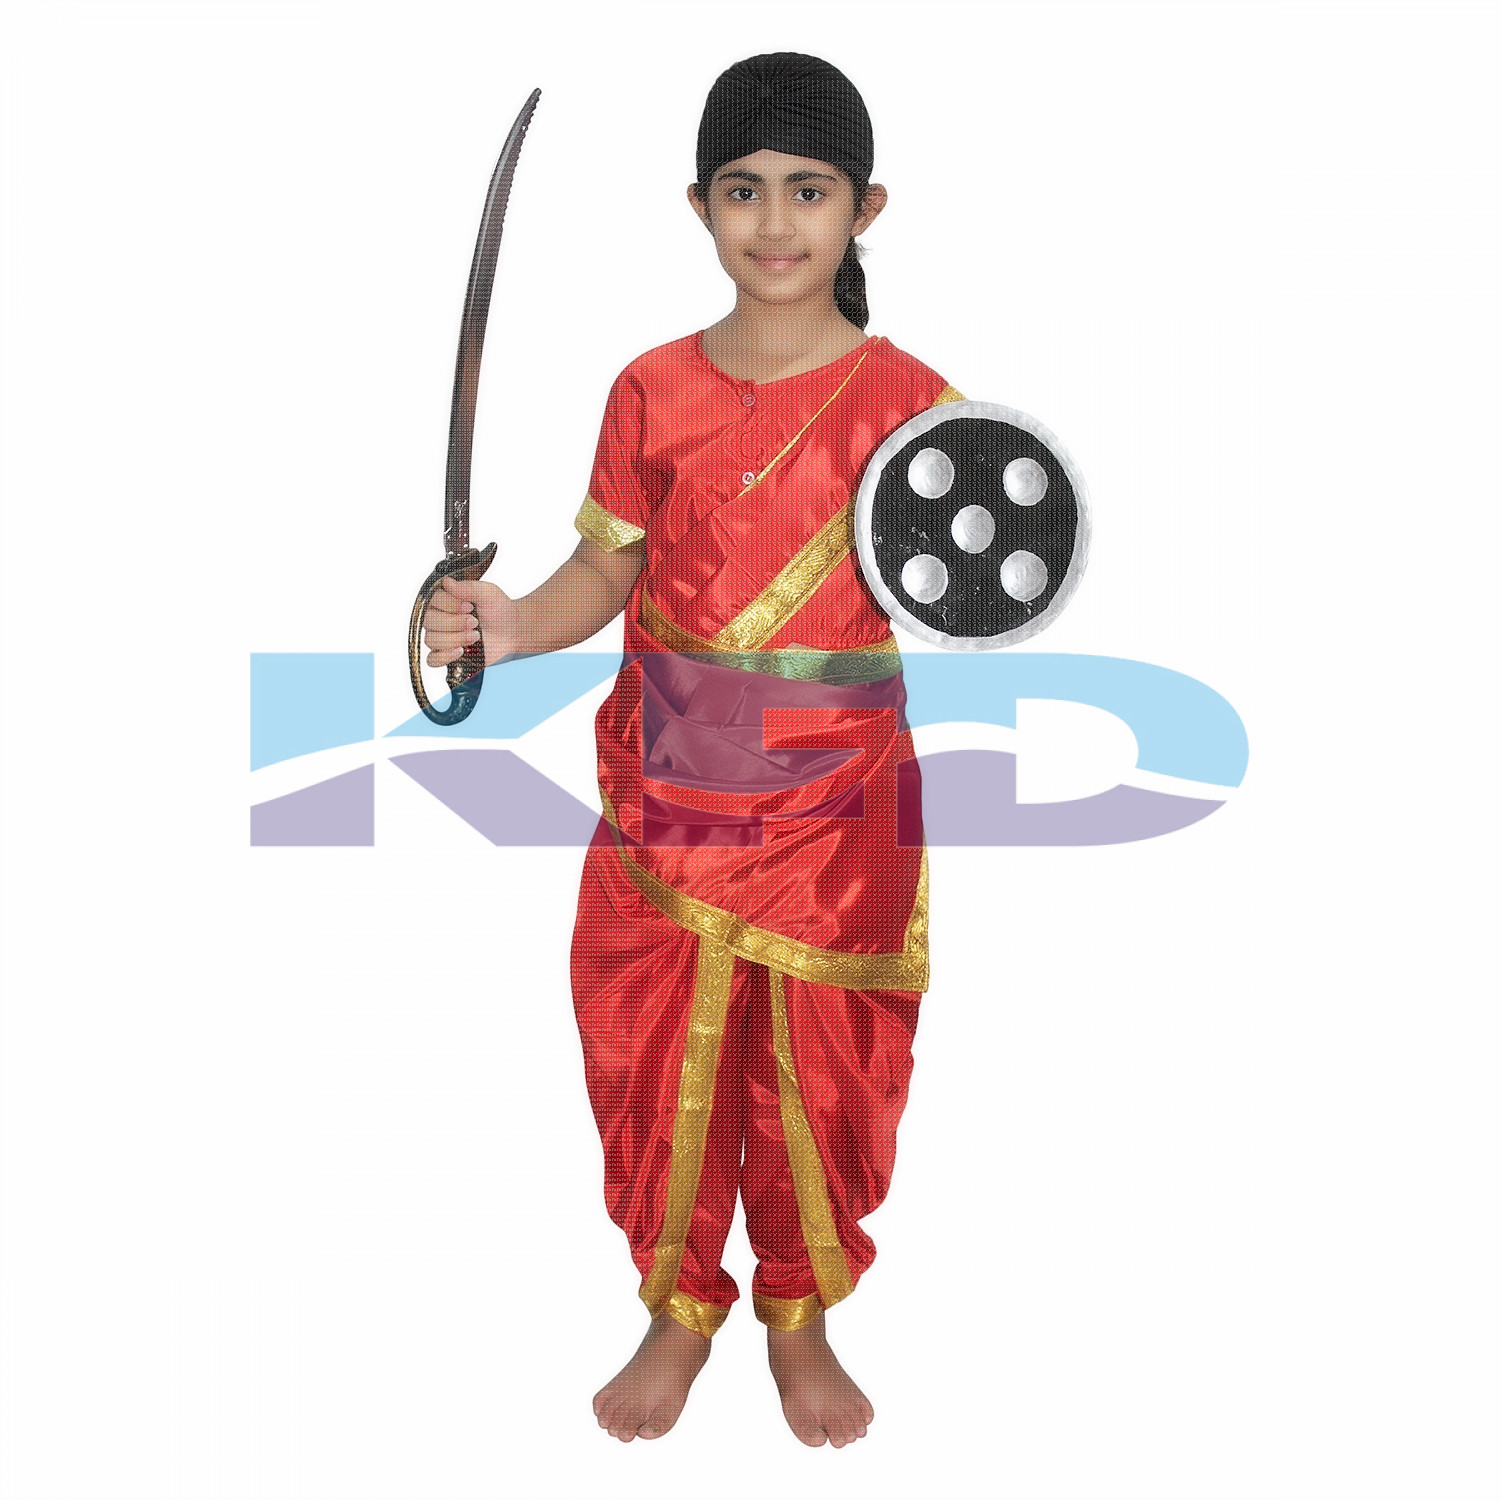  Rani Laxmi Bai Red National Hero/freedom figter Costume for Independence Day/Republic Day/Annual function/theme party/Competition/Stage Shows Dress